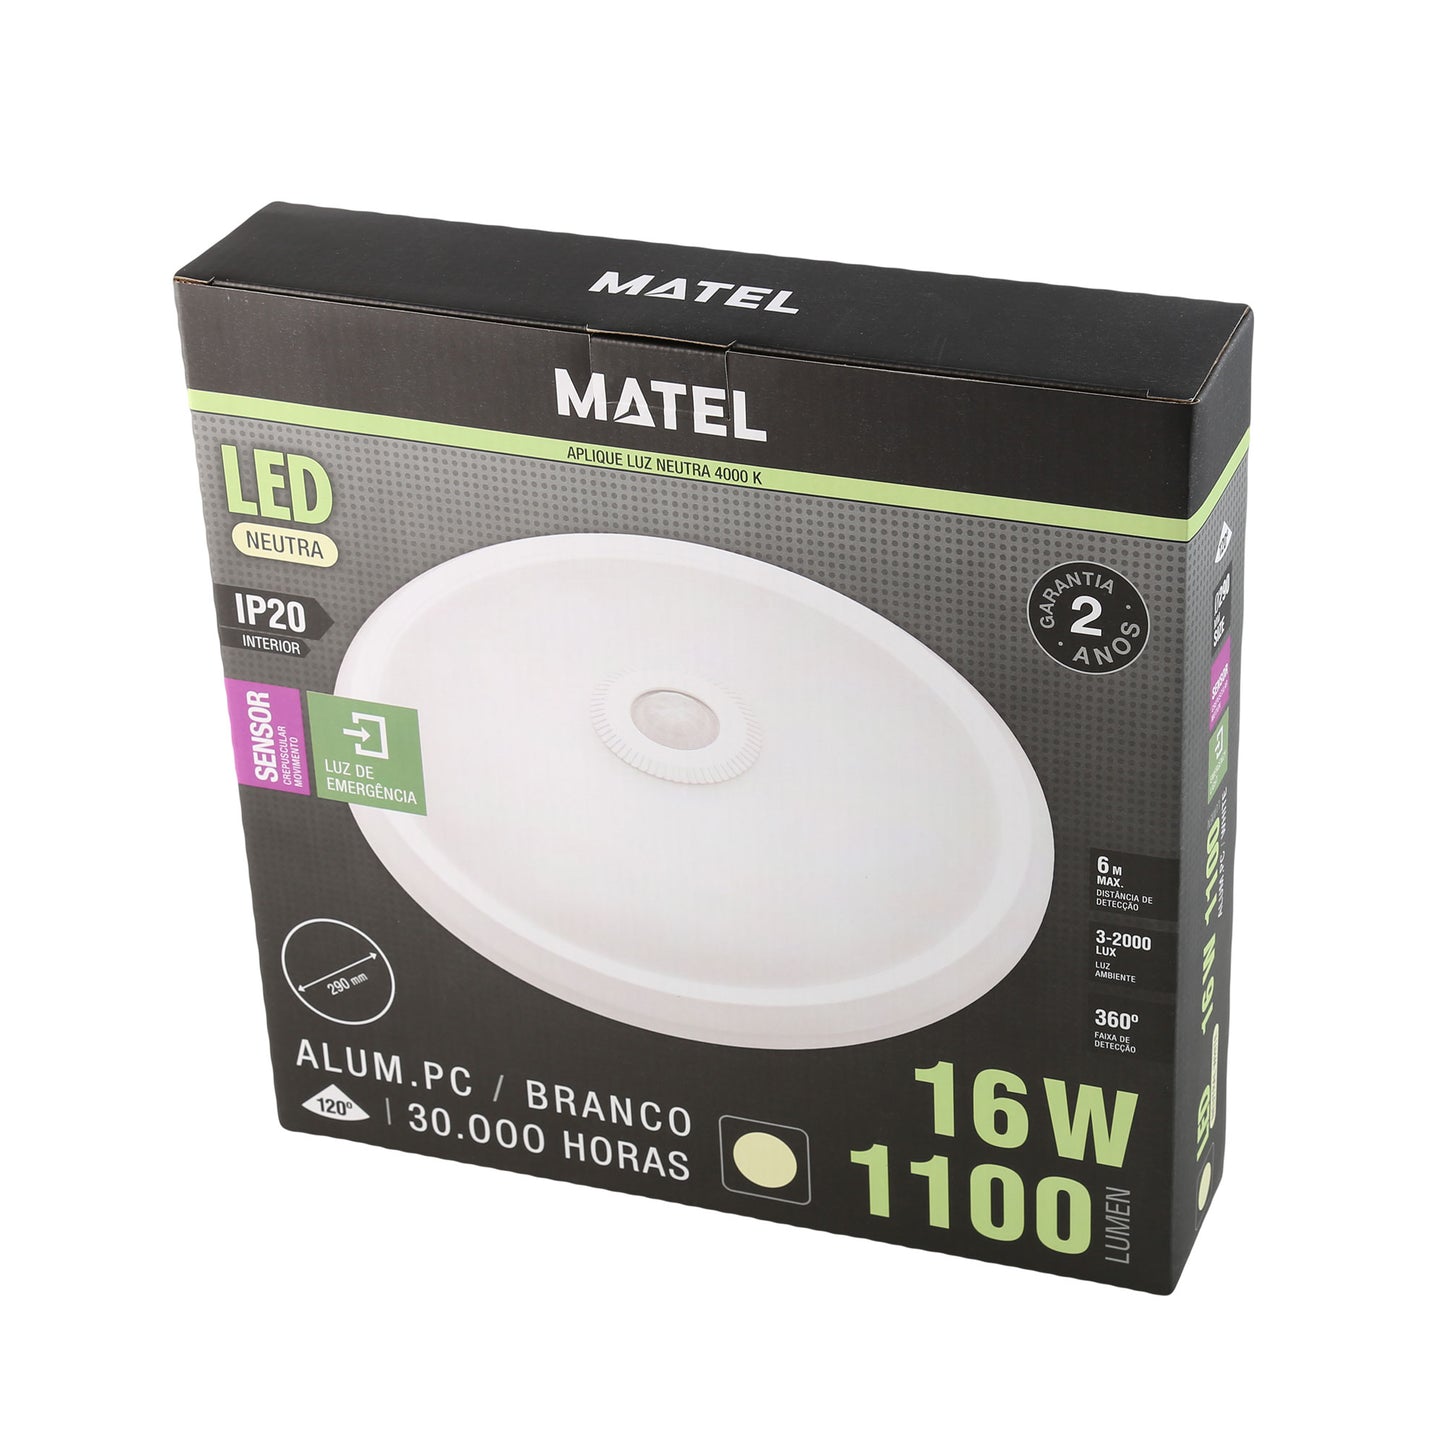 ROUND LED WALL LAMP WITH SENSOR IP20 EMERGENCY 16W NEUTRAL 